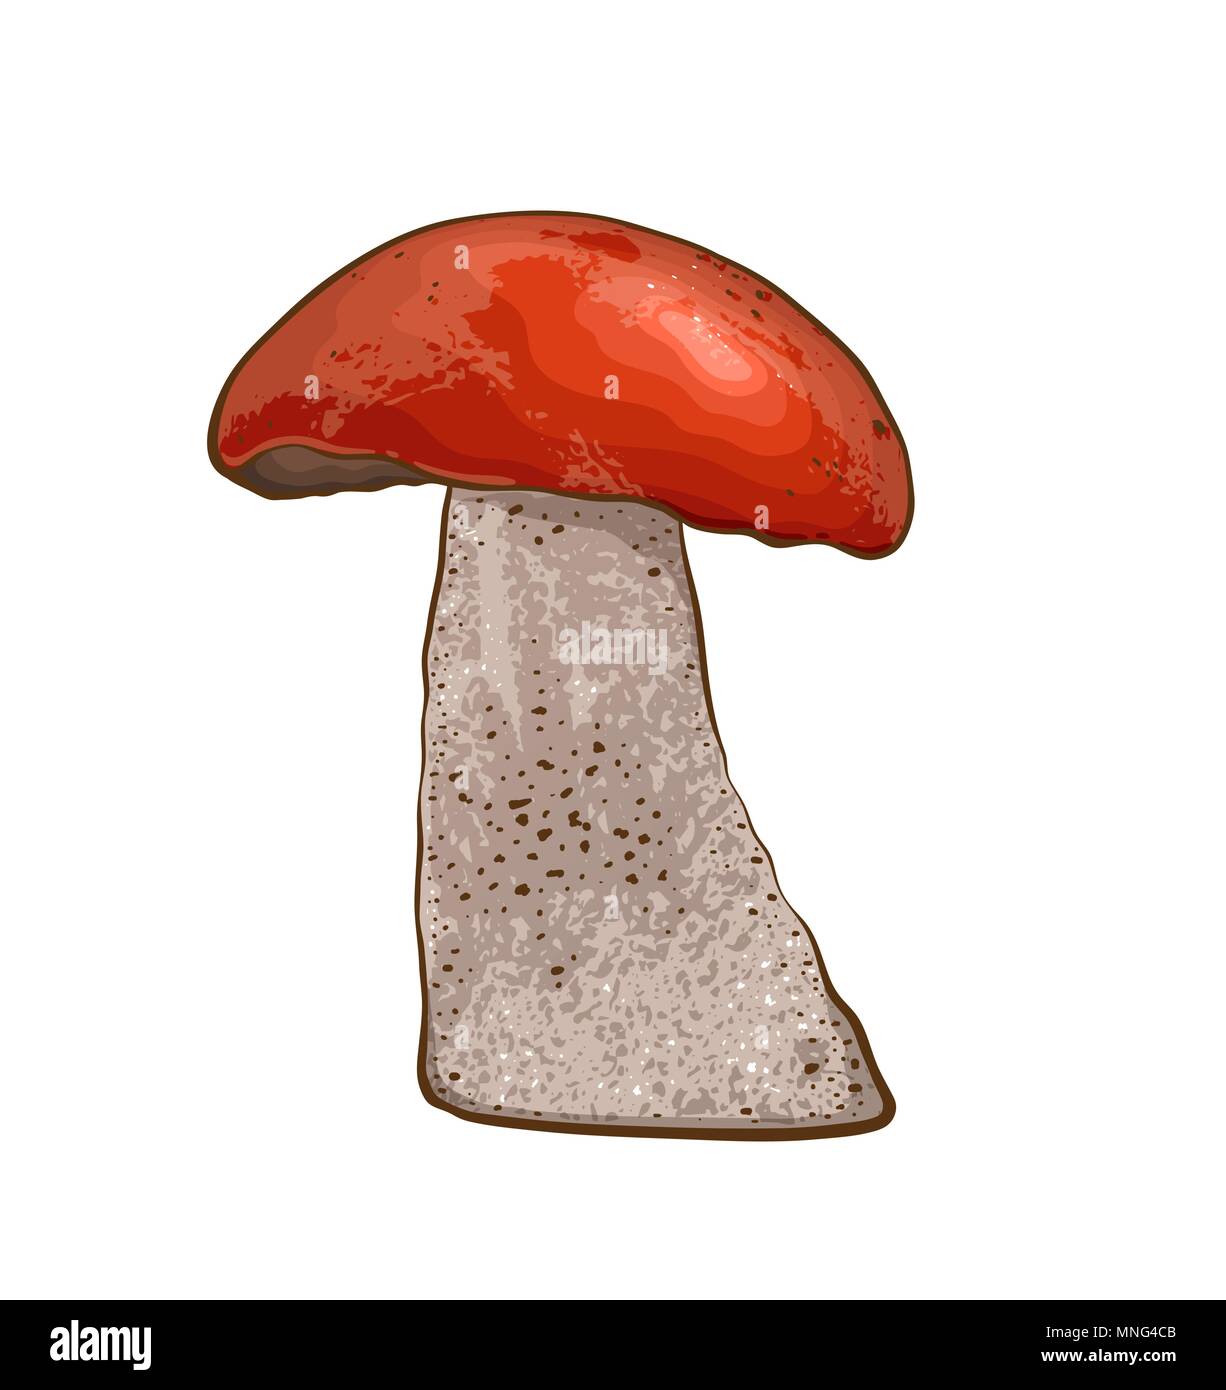 Edible wild mushroom with red cap on a white background. Vector illustration. Stock Vector